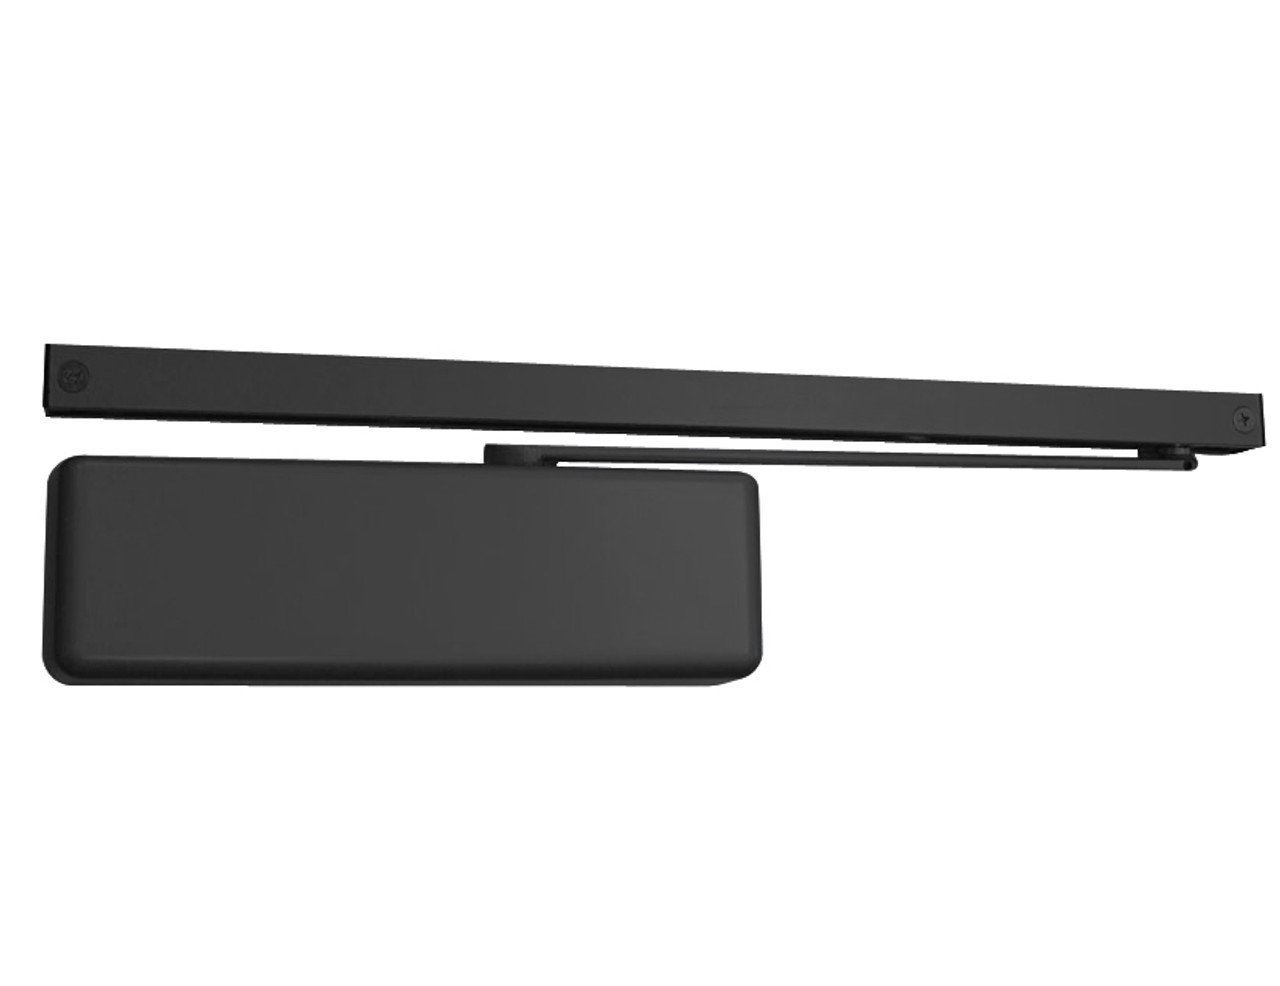 4040XPT-DE-H-LH-BLACK LCN Door Closer with Double Egress Hold Open Arm in Black Finish